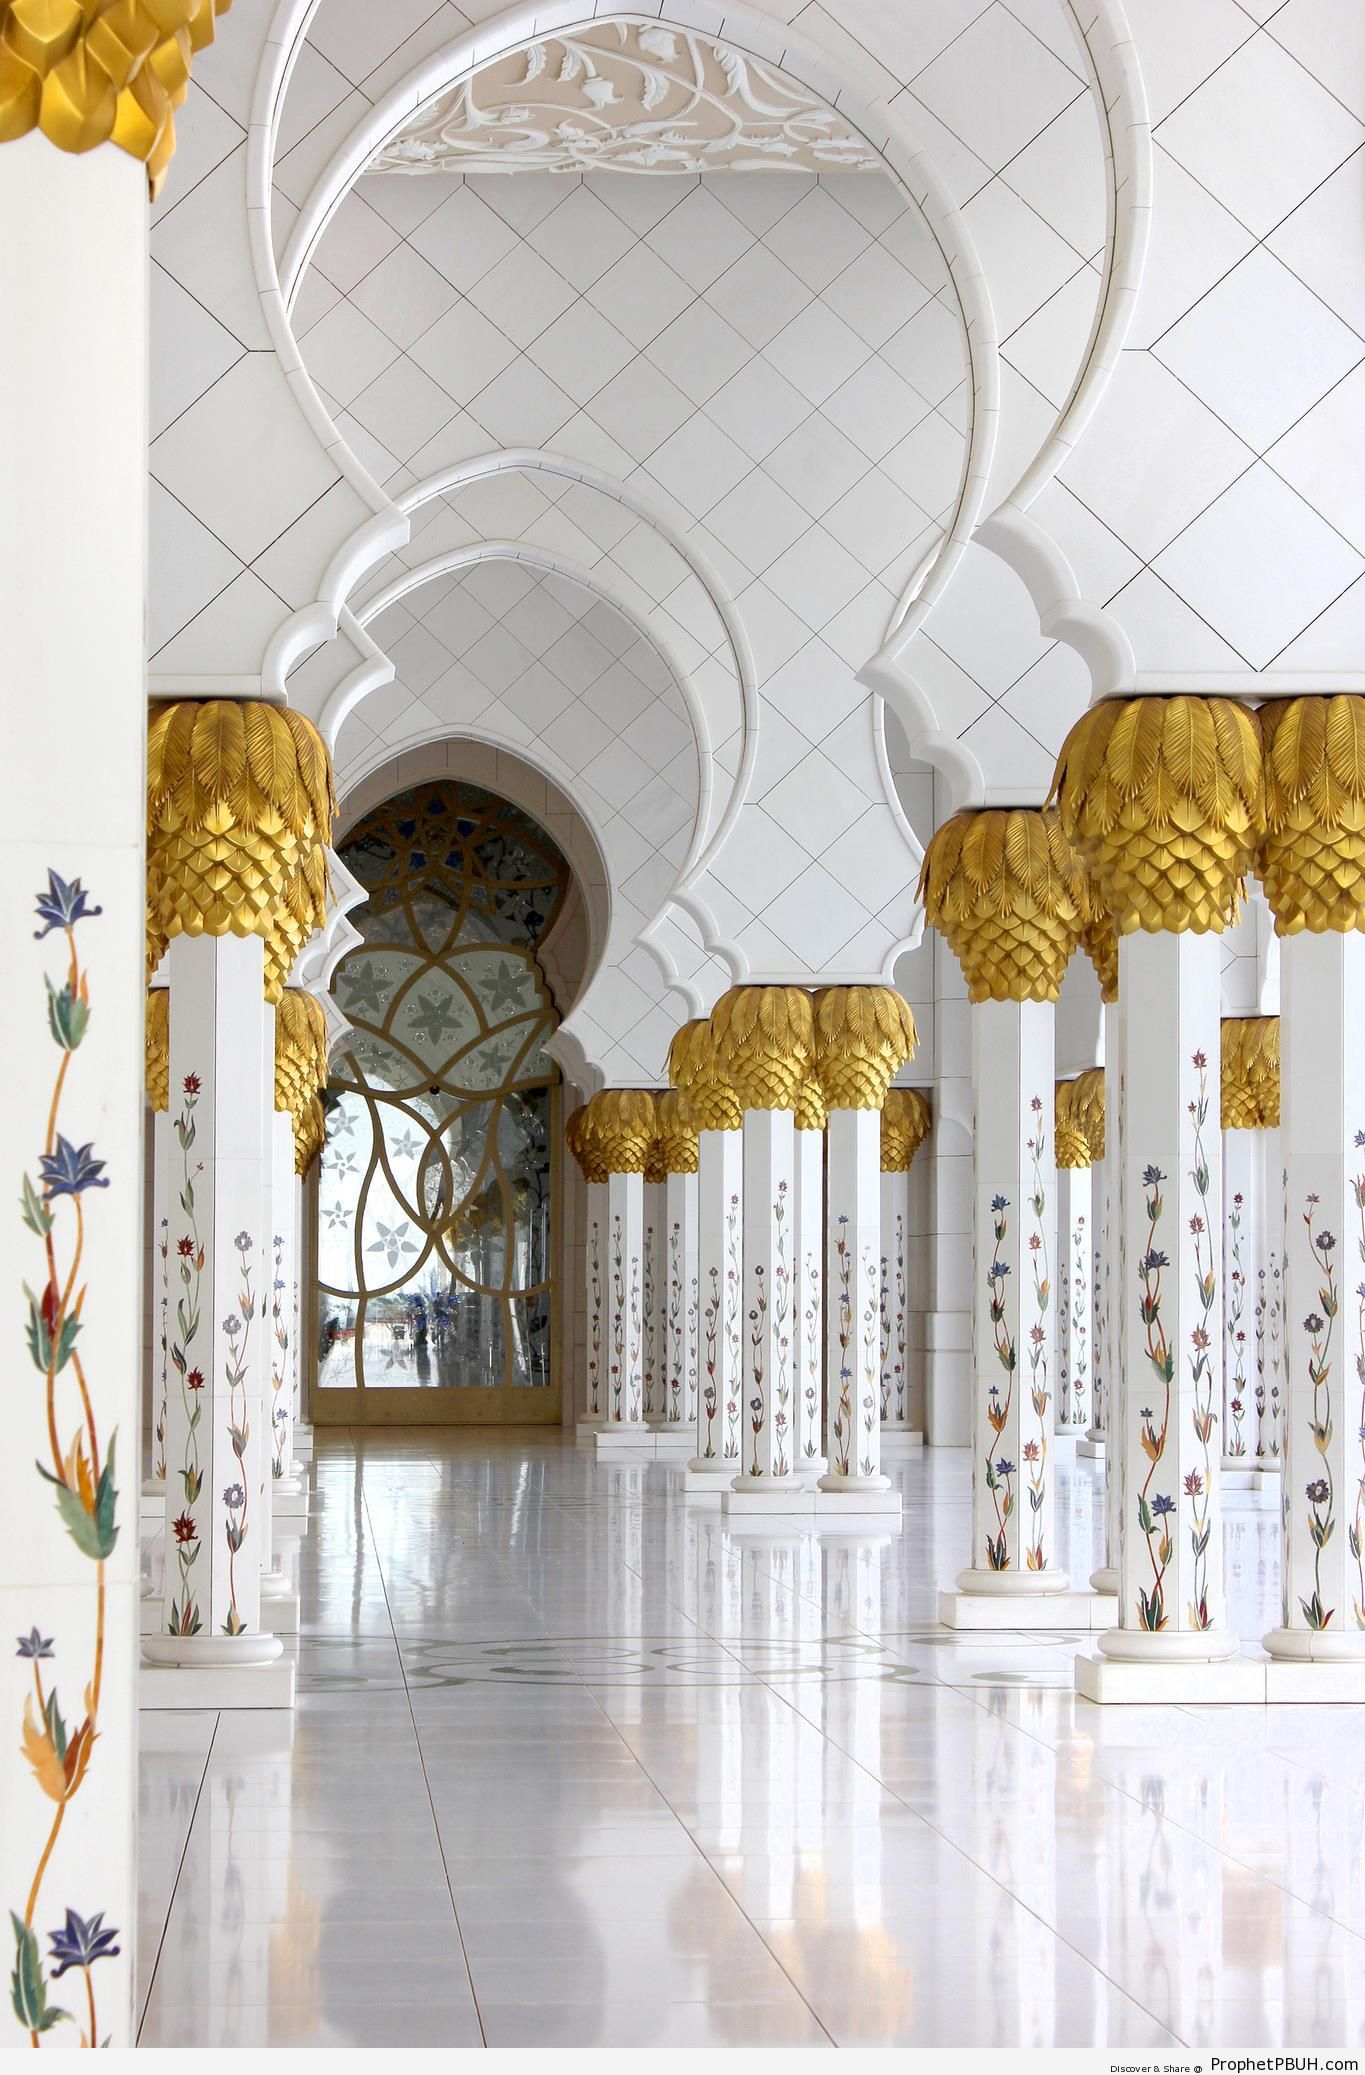 The Grand Mosque-s Arcades in Abu Dhabi, United Arab Emirates - Abu Dhabi, United Arab Emirates -Picture